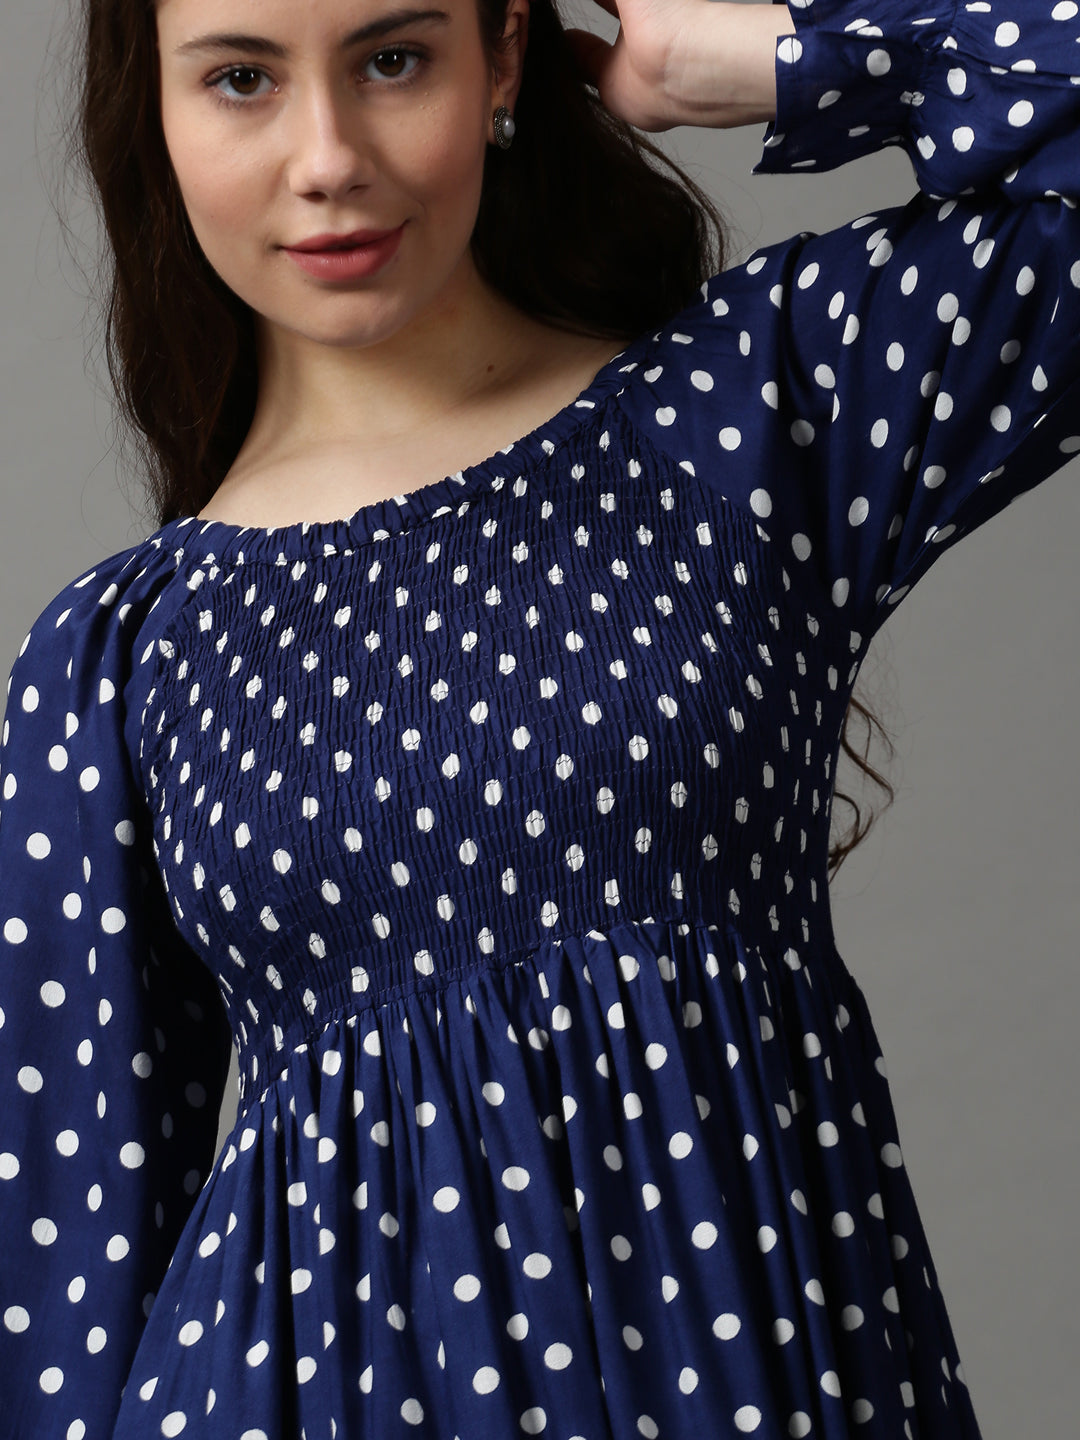 Women's Blue Printed Fit and Flare Dress